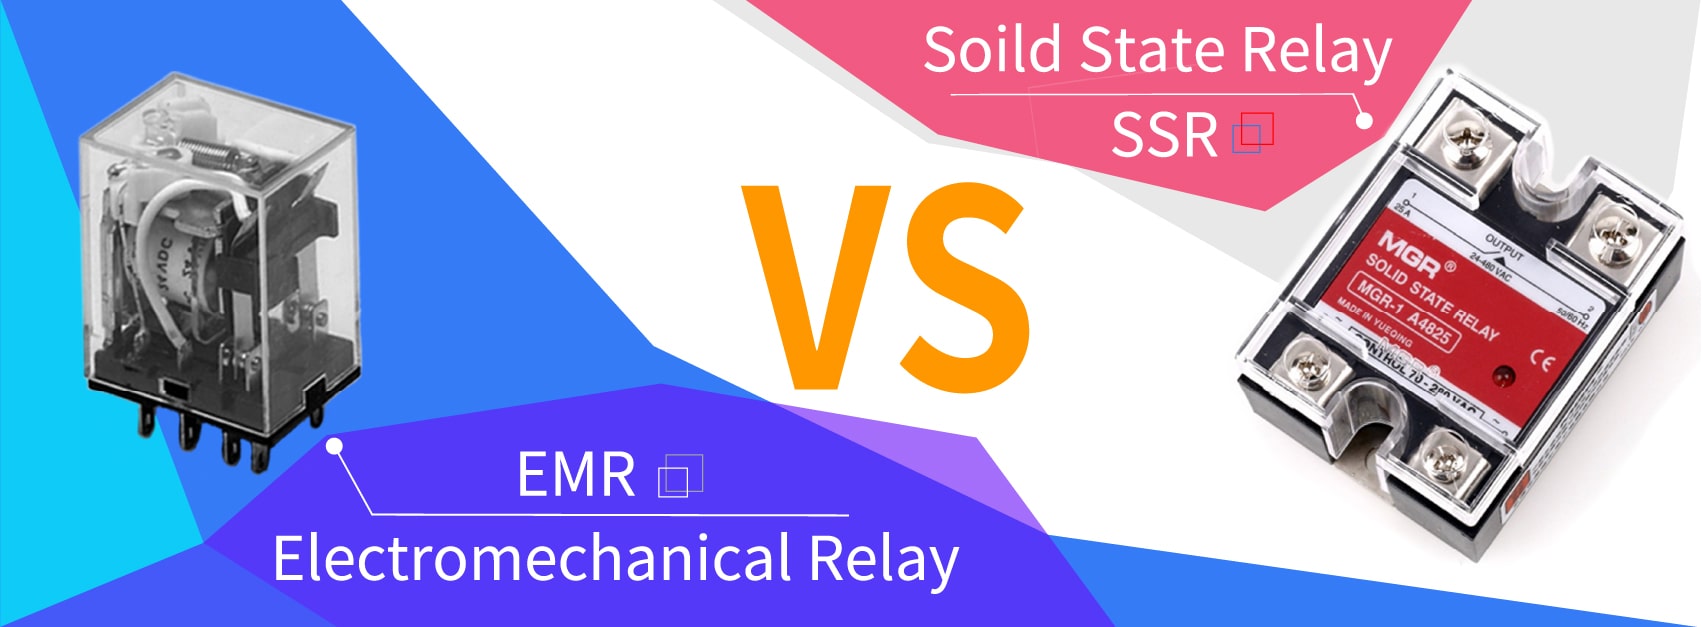 solid state relay vs electromechanical relay